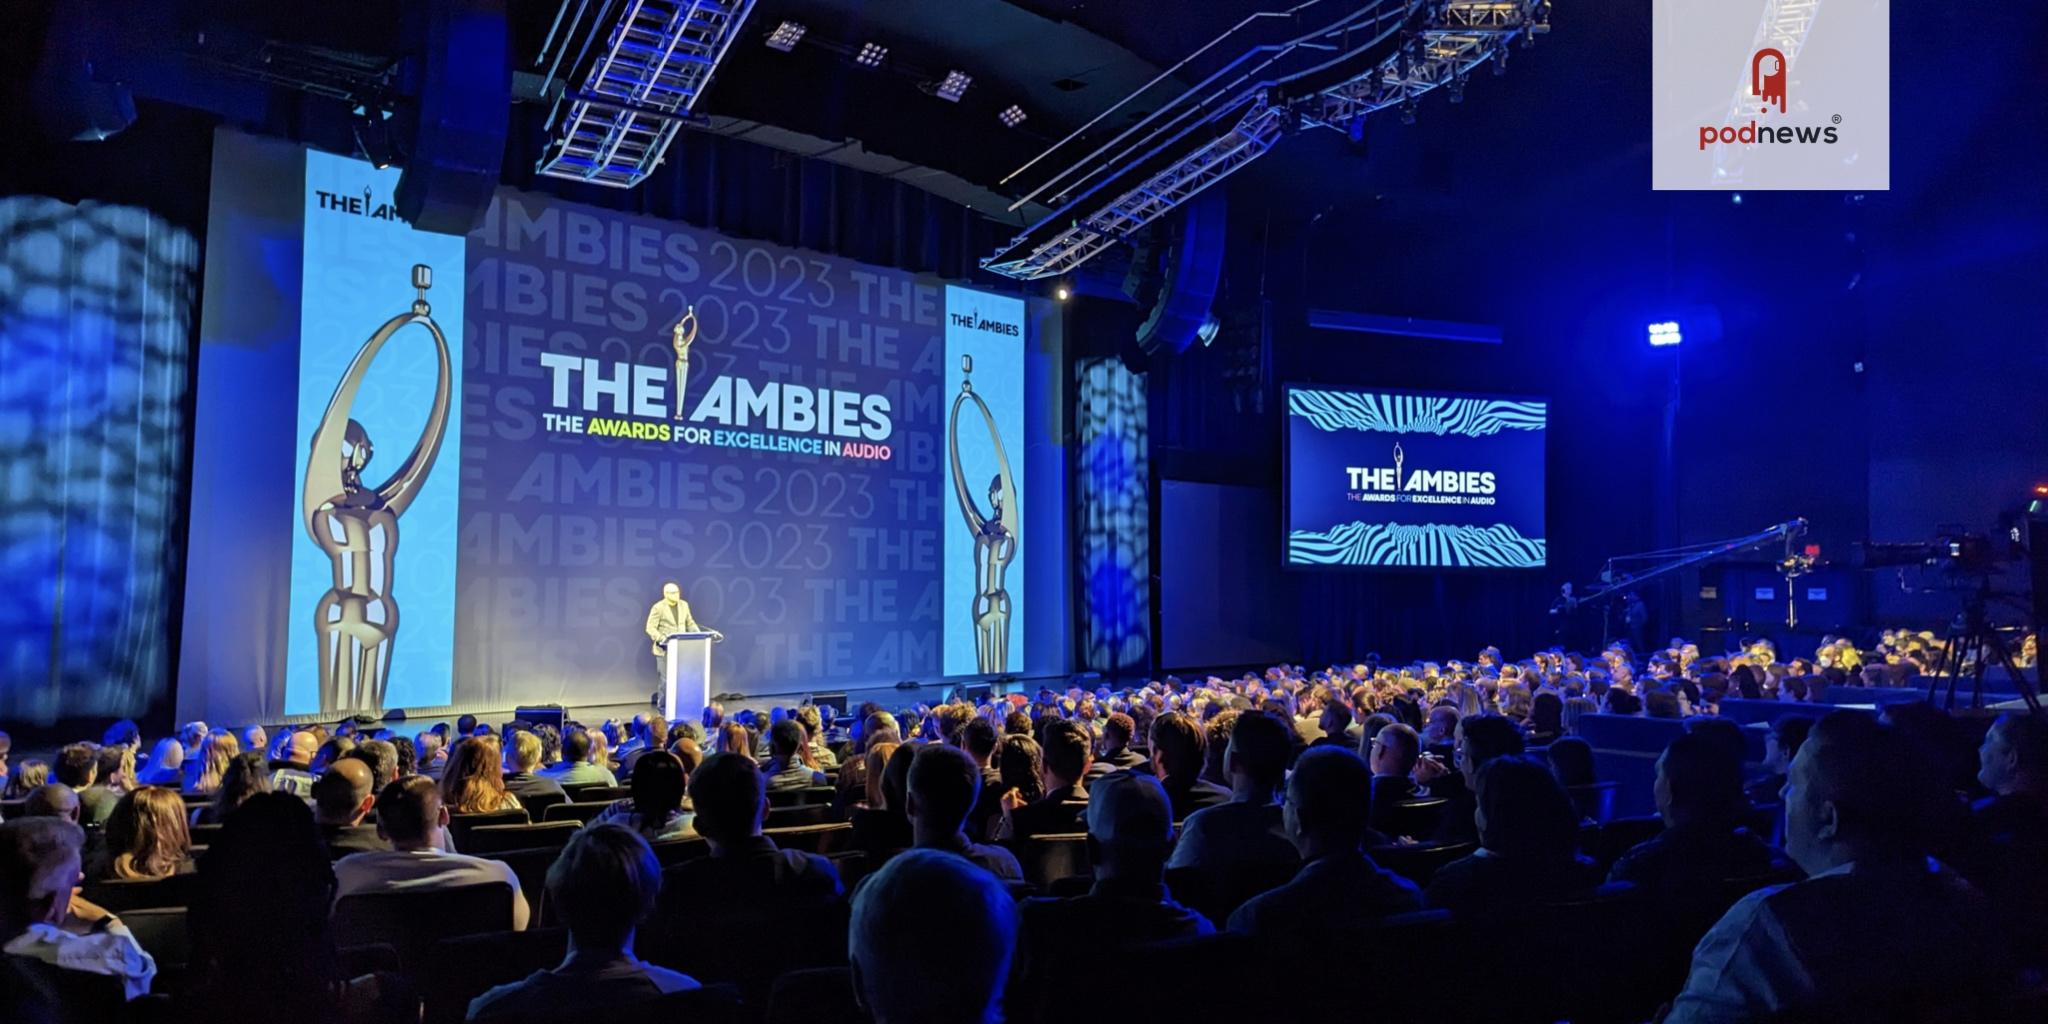 The Ambies the winners of the third annual awards, 2023